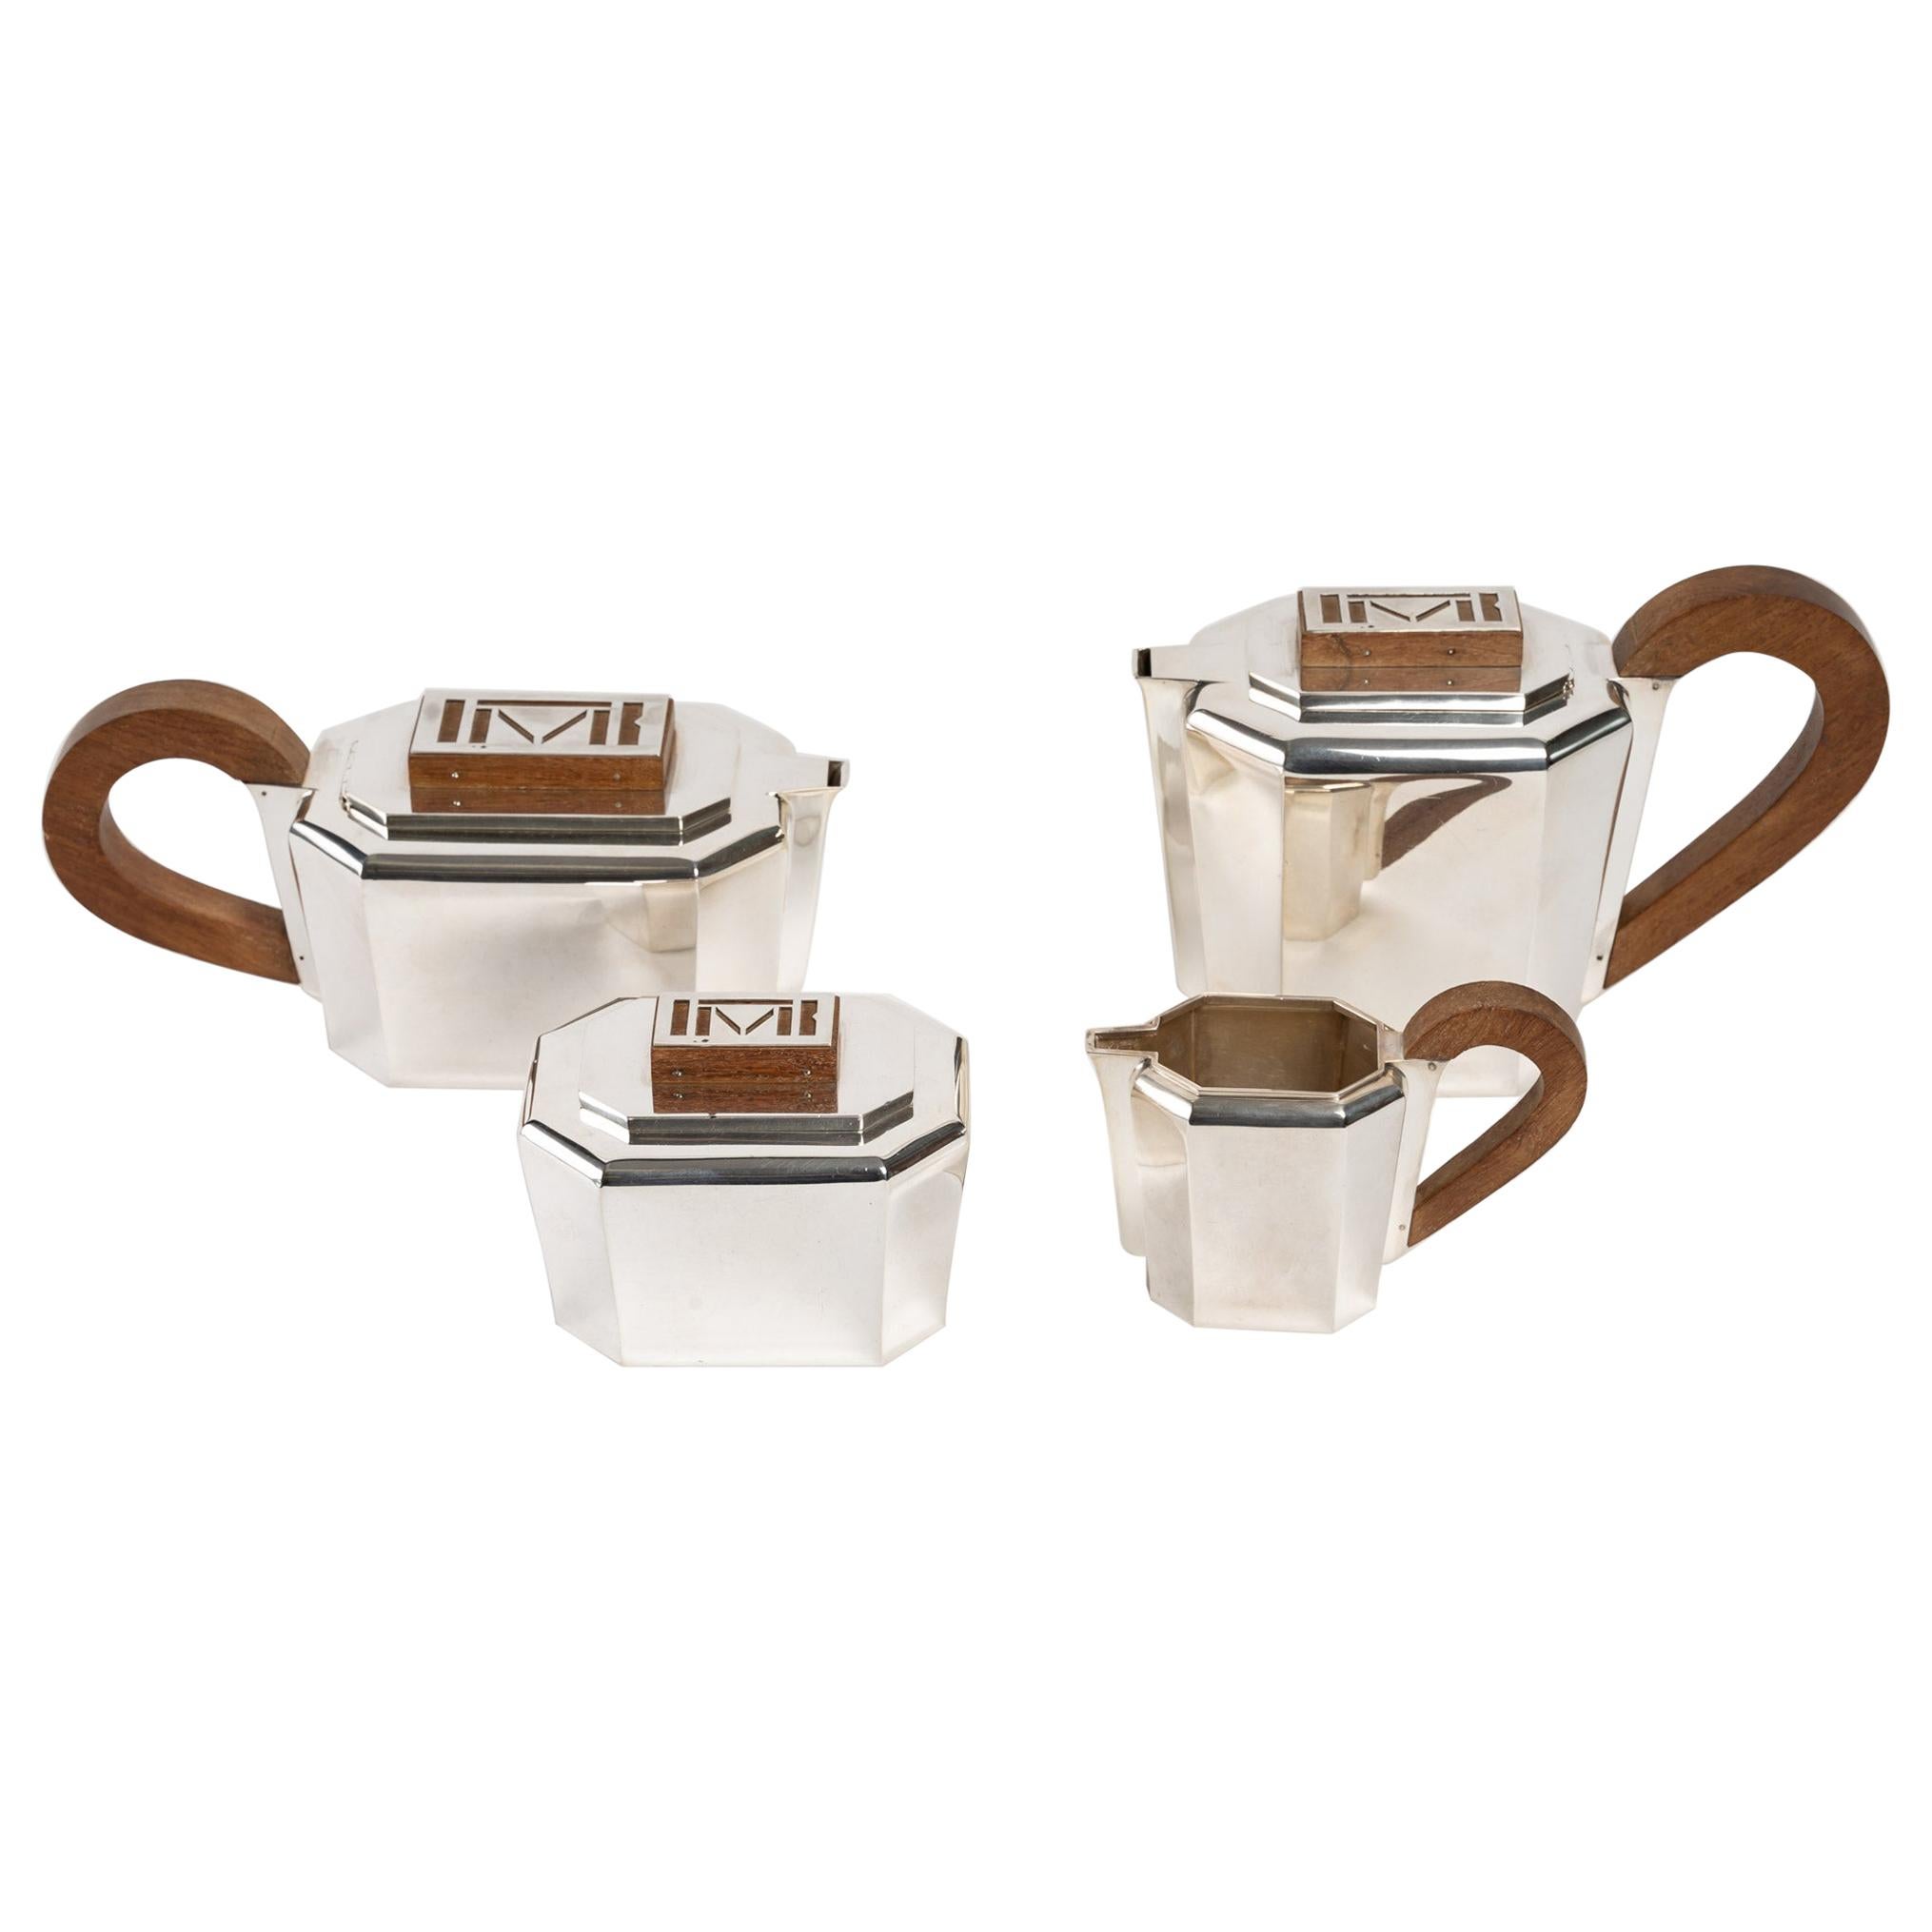 1937 Jean E. Puiforcat, Tea and Coffee Service in Sterling Silver and Walnut